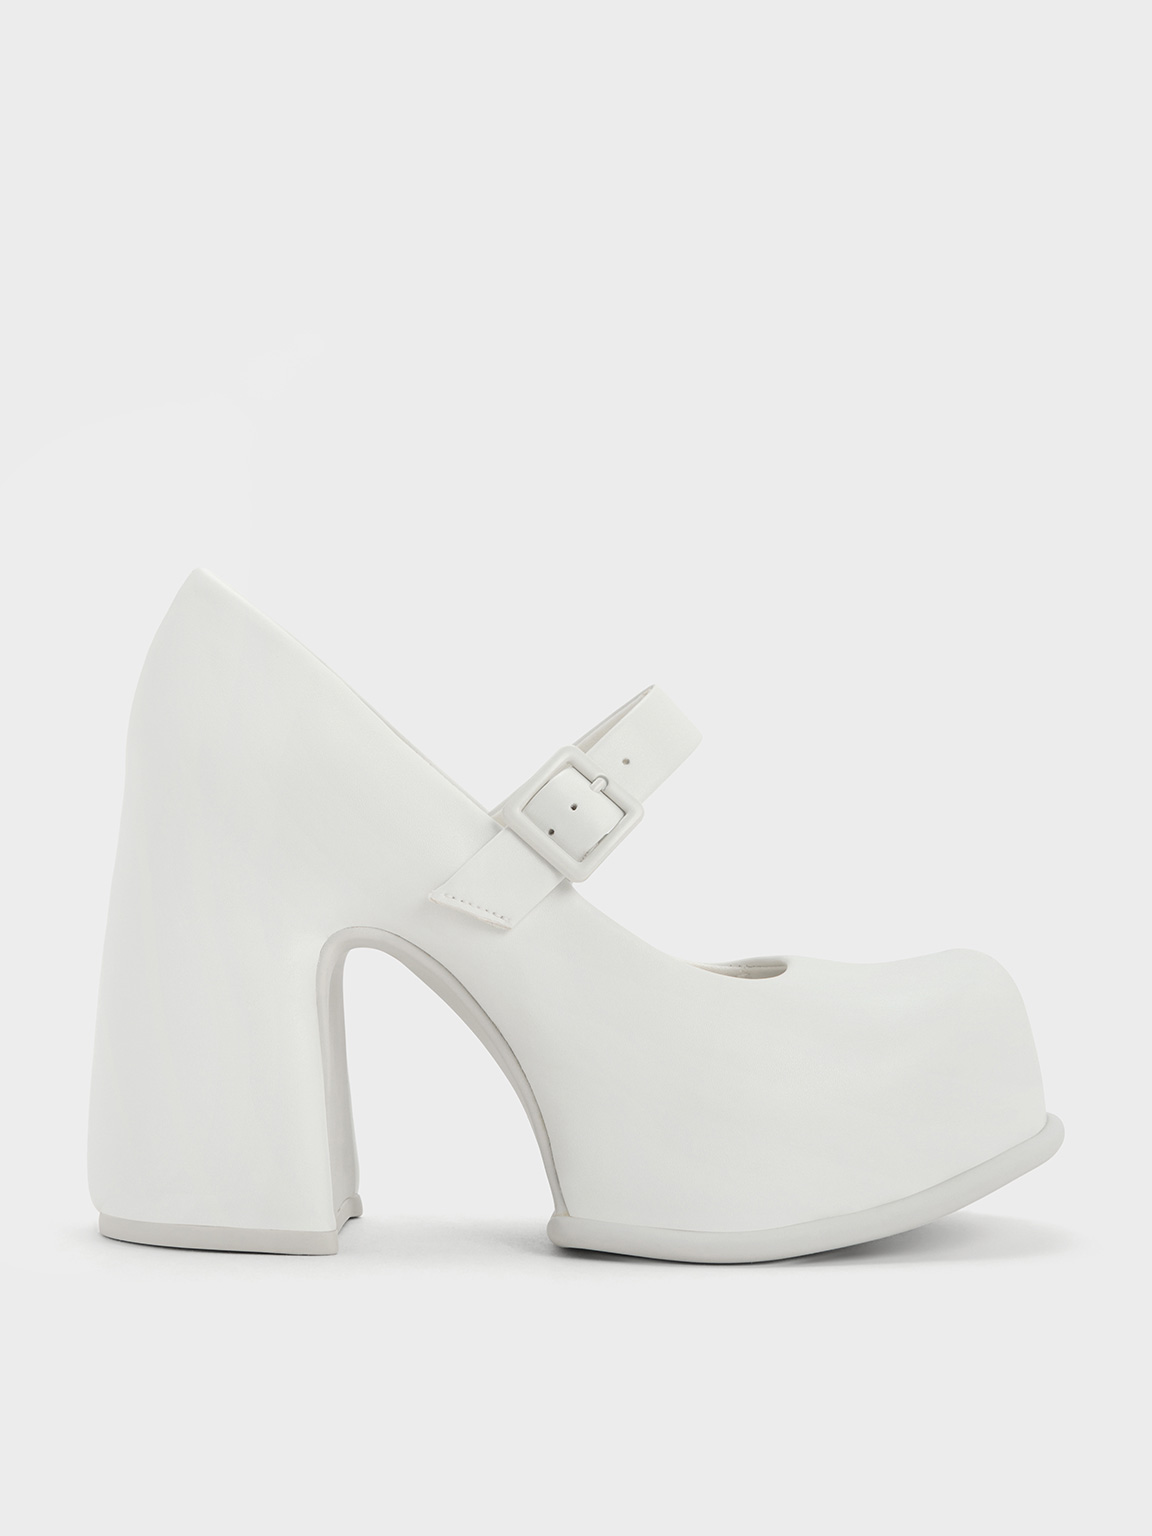 Charles & Keith Pixie Platform Mary Janes In White